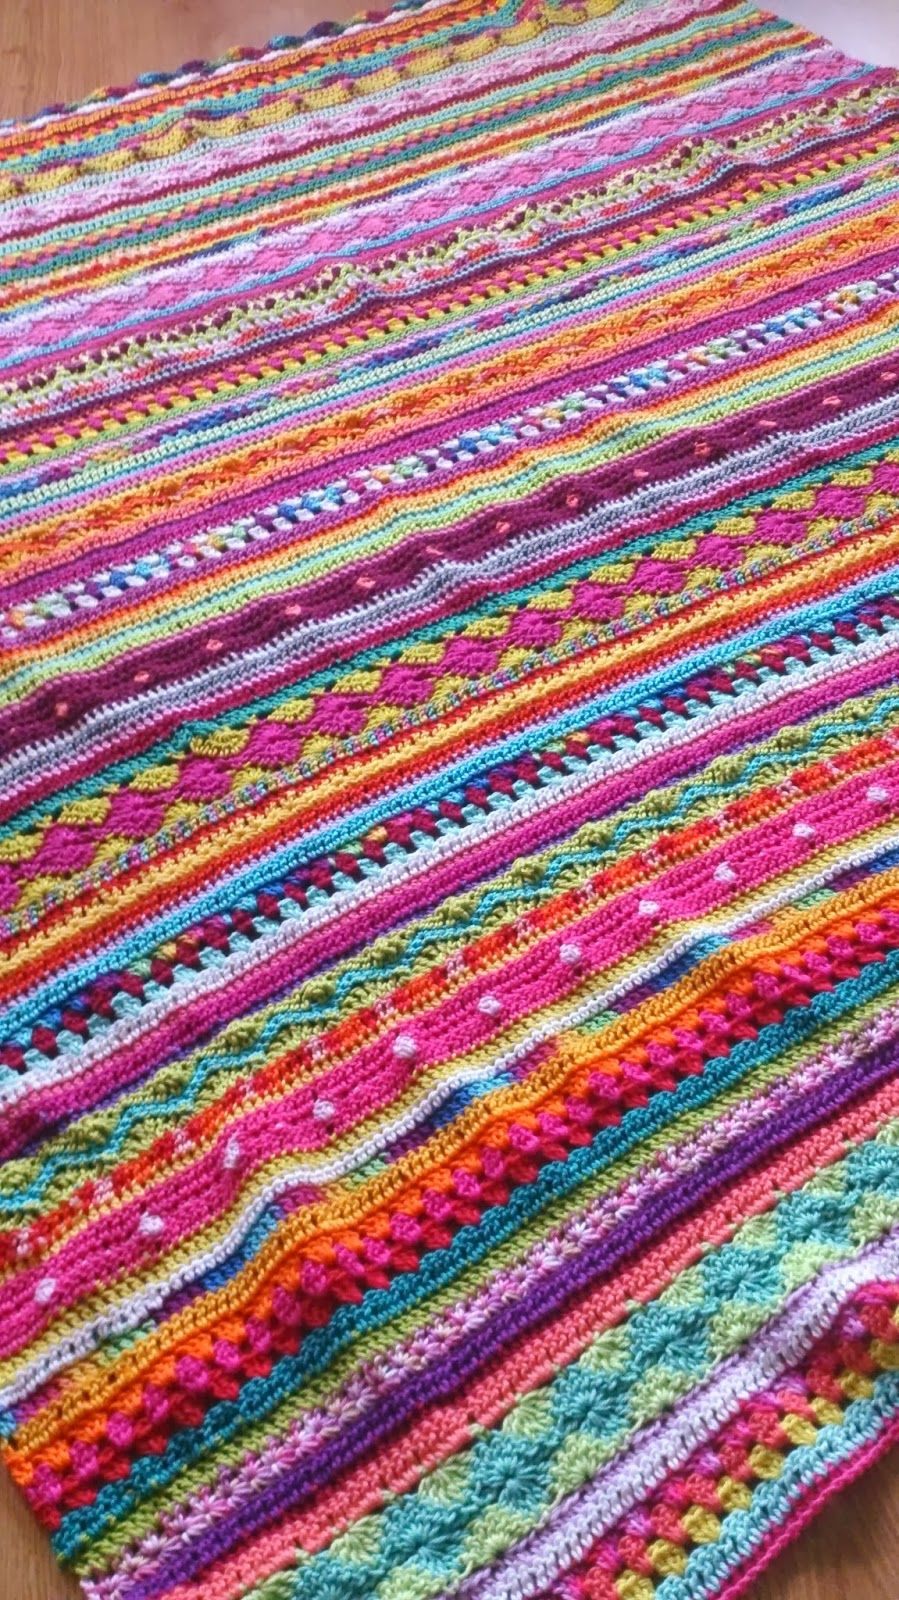 Unusual Crochet Patterns What A Gorgeous Crochet Blanket So Bright And Happy And So Unlike